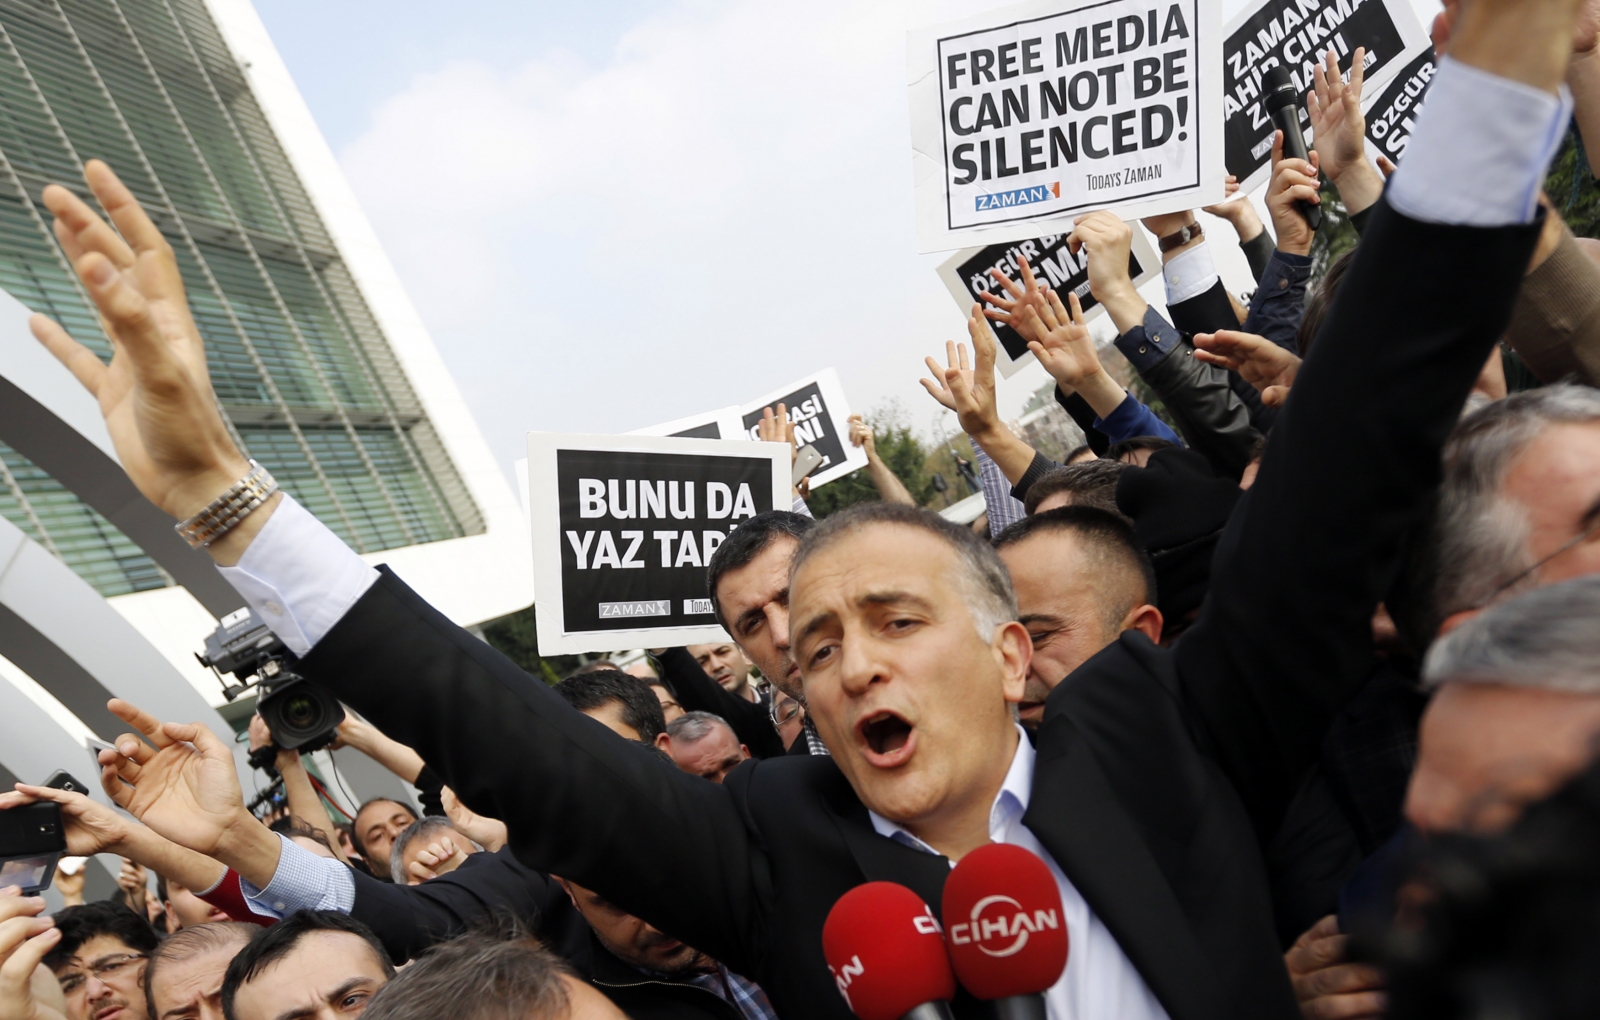 Zaman editor-in-chief Ekrem Dumanli, surrounded by his colleagues and plainclothes police officers (C), reacts as he leaves the headquarters of Zaman daily newspaper in Istanbul